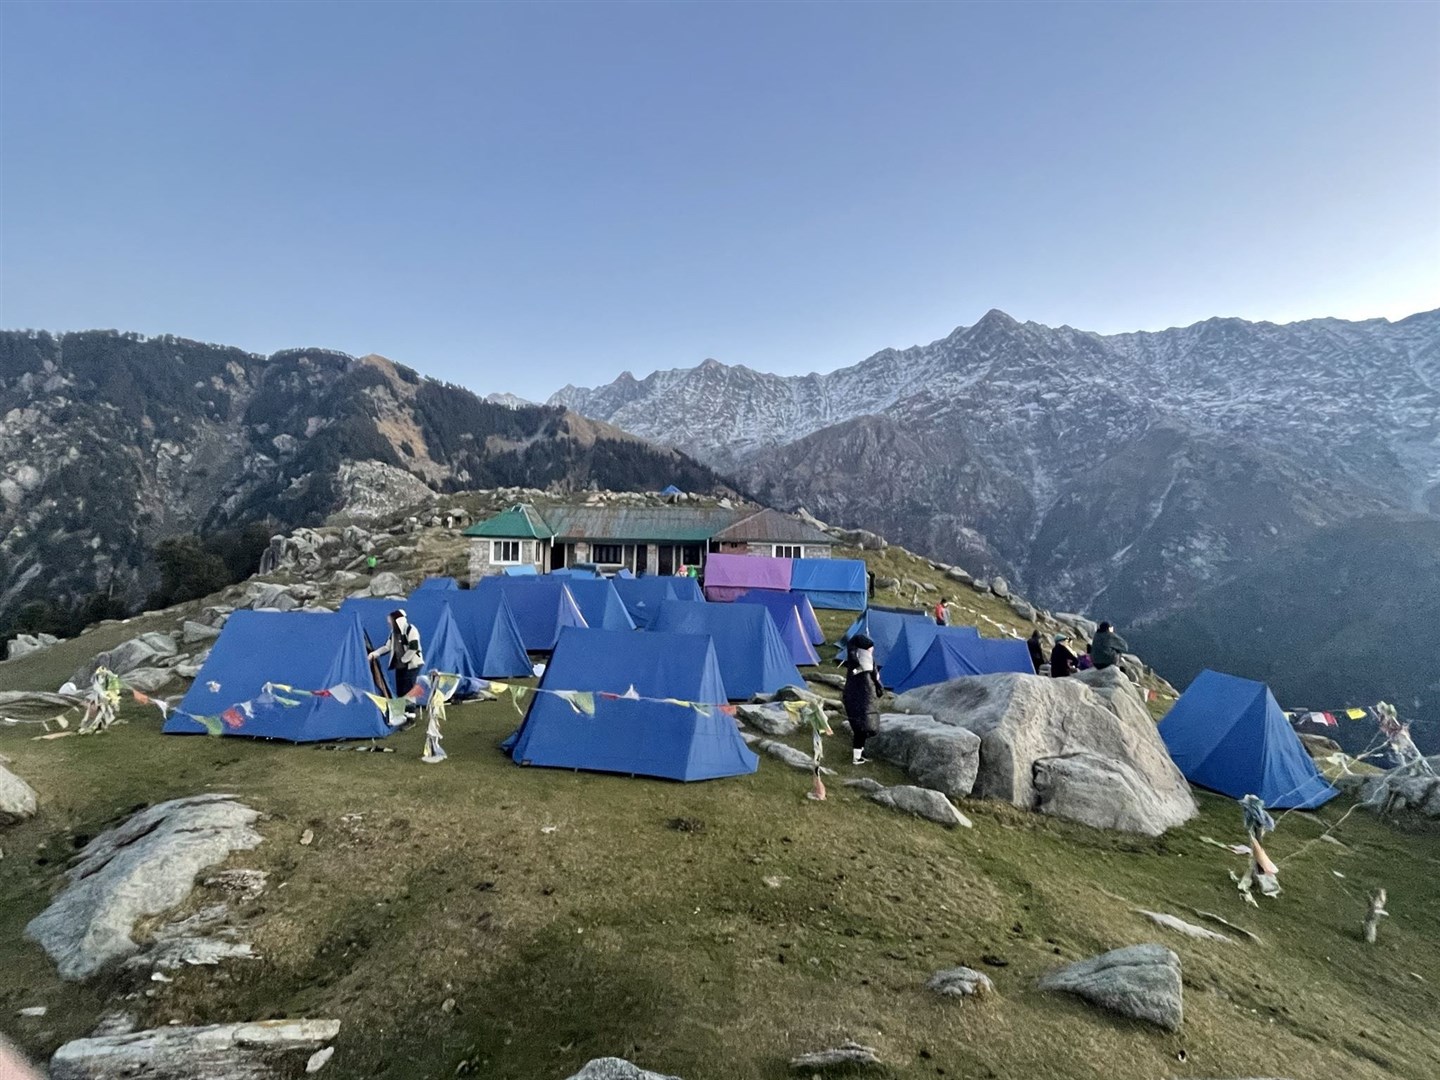 One of the camps on a narrow ridge during the Himalayan trek.